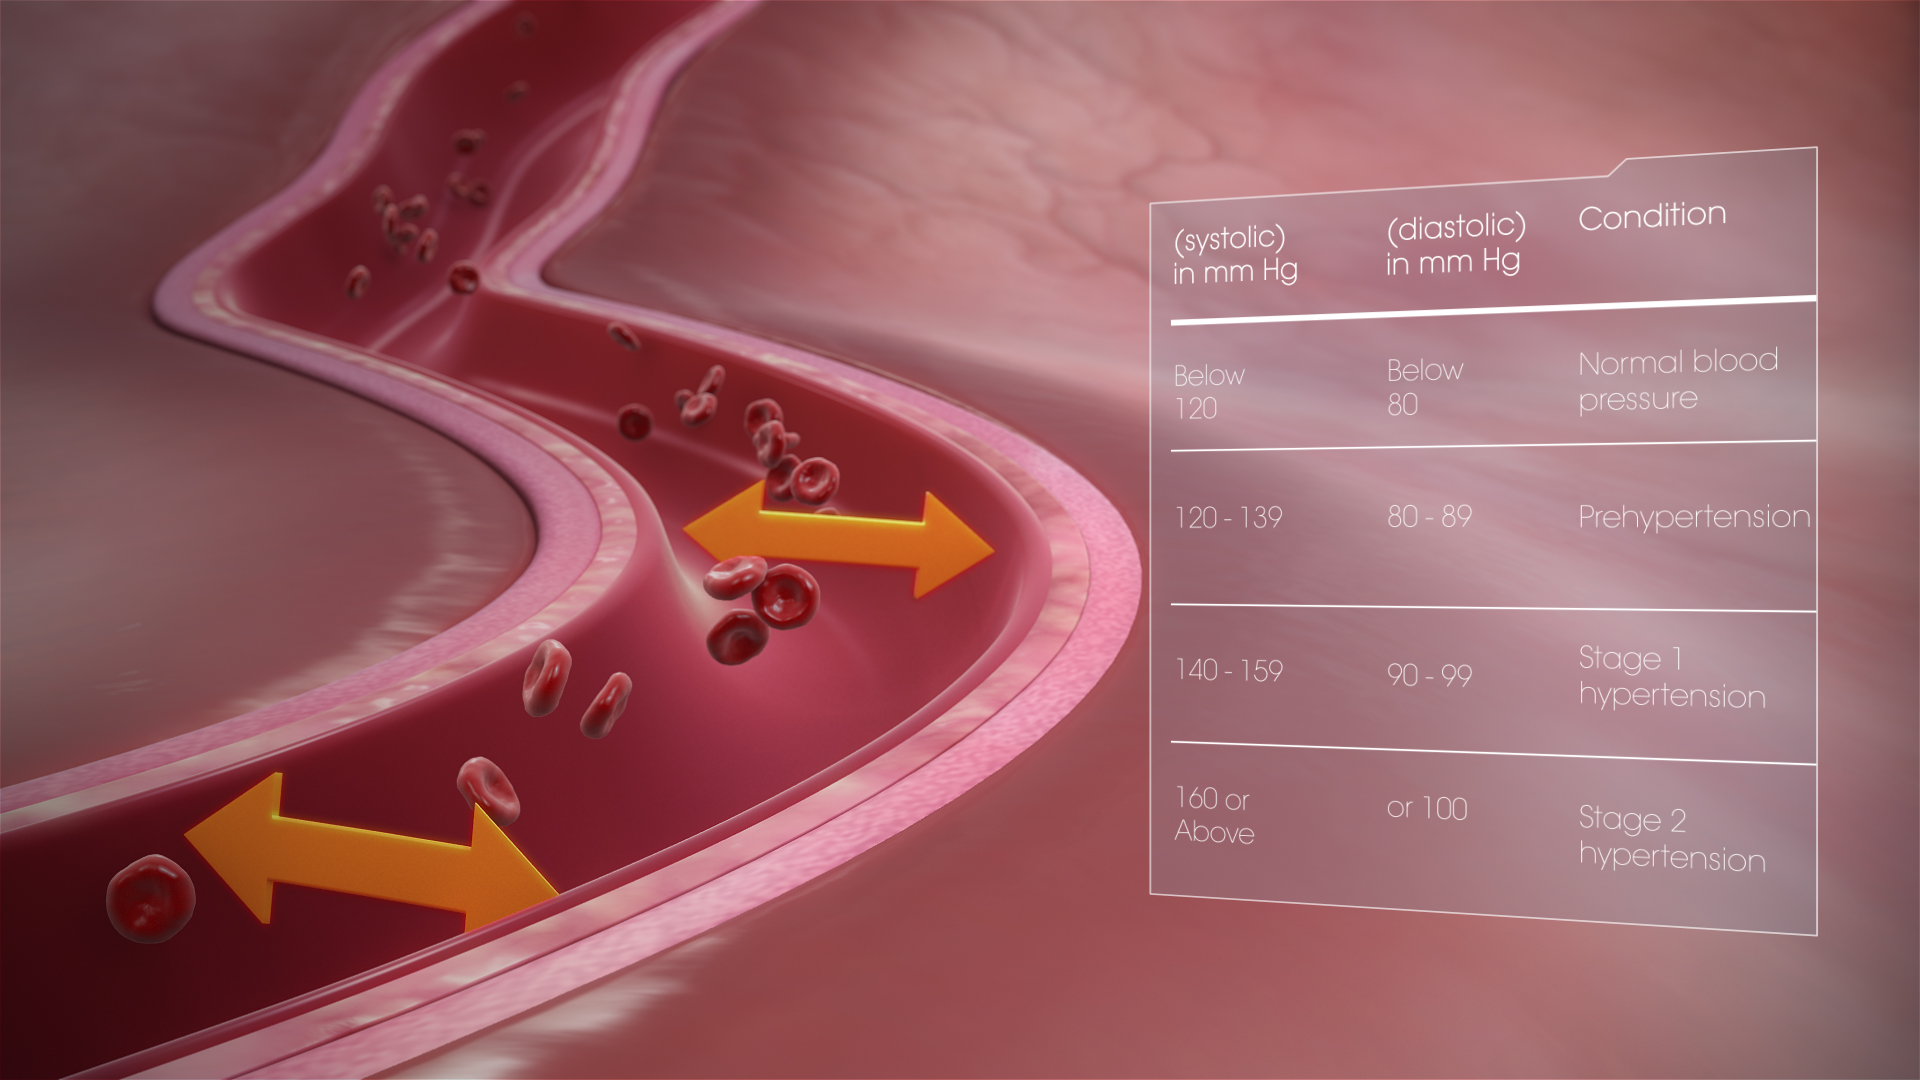 Medical Animation Still Shot Showing Different Conditions of Hypertension